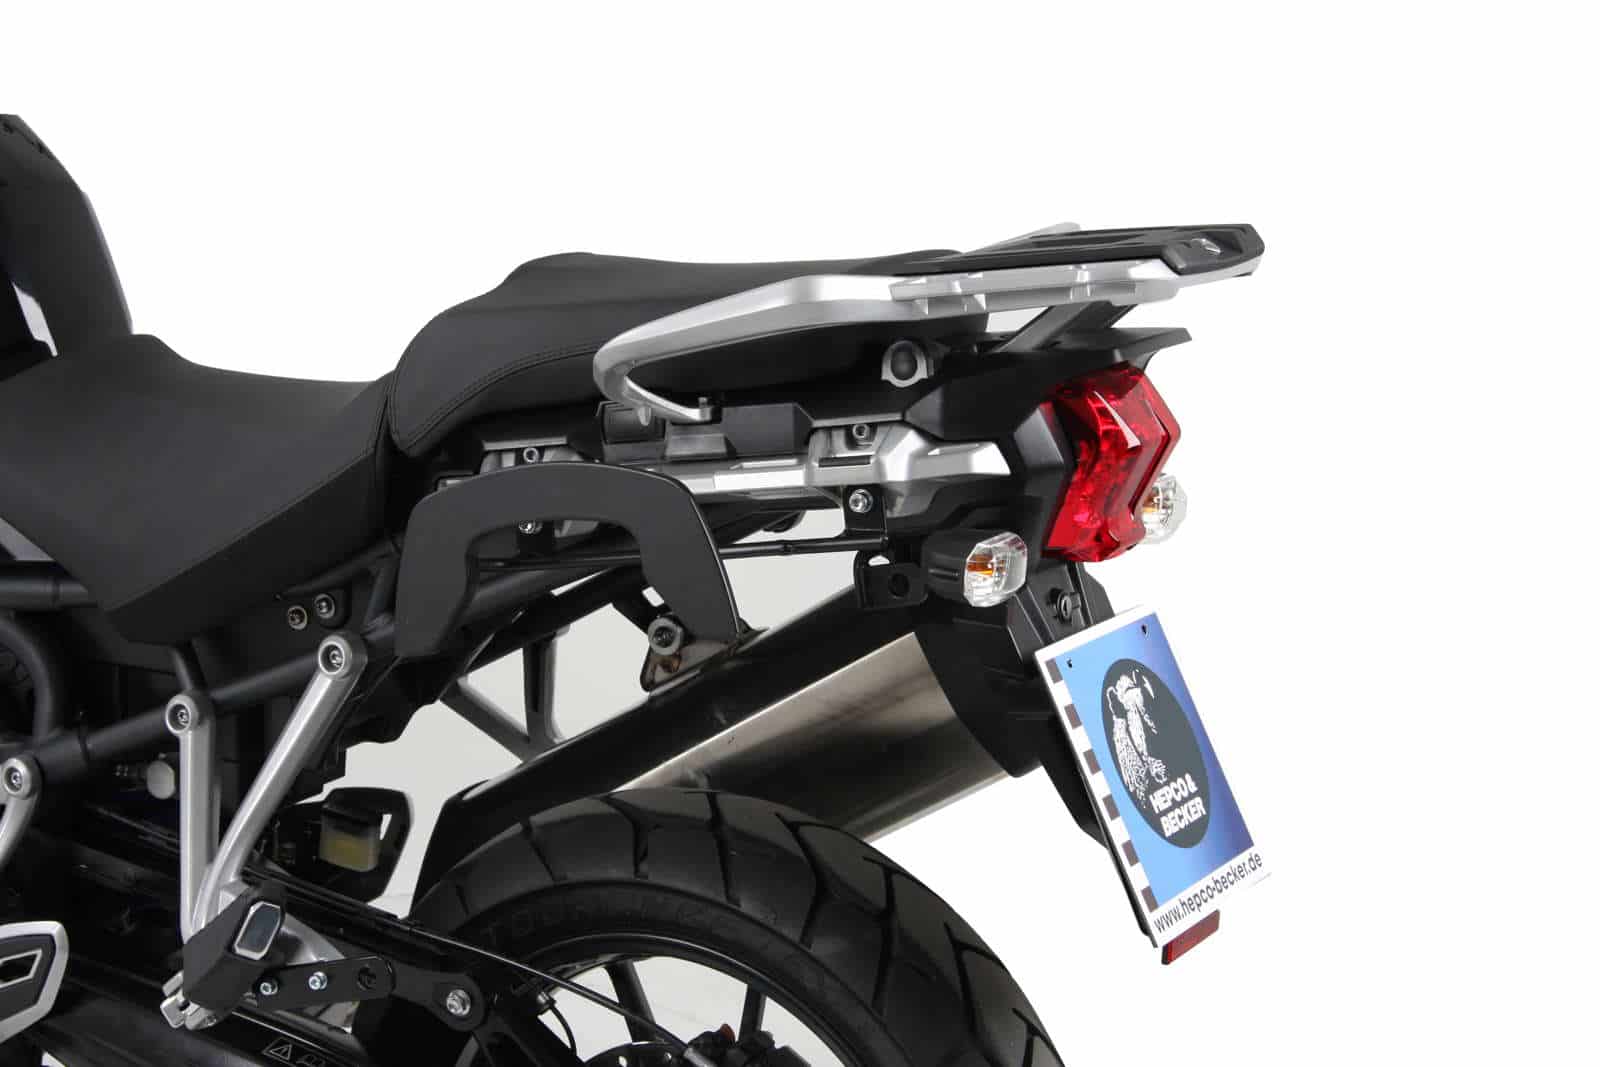 C-Bow sidecarrier for Triumph Tiger Explorer 1200 XR/X/XC/X (2012-2015)